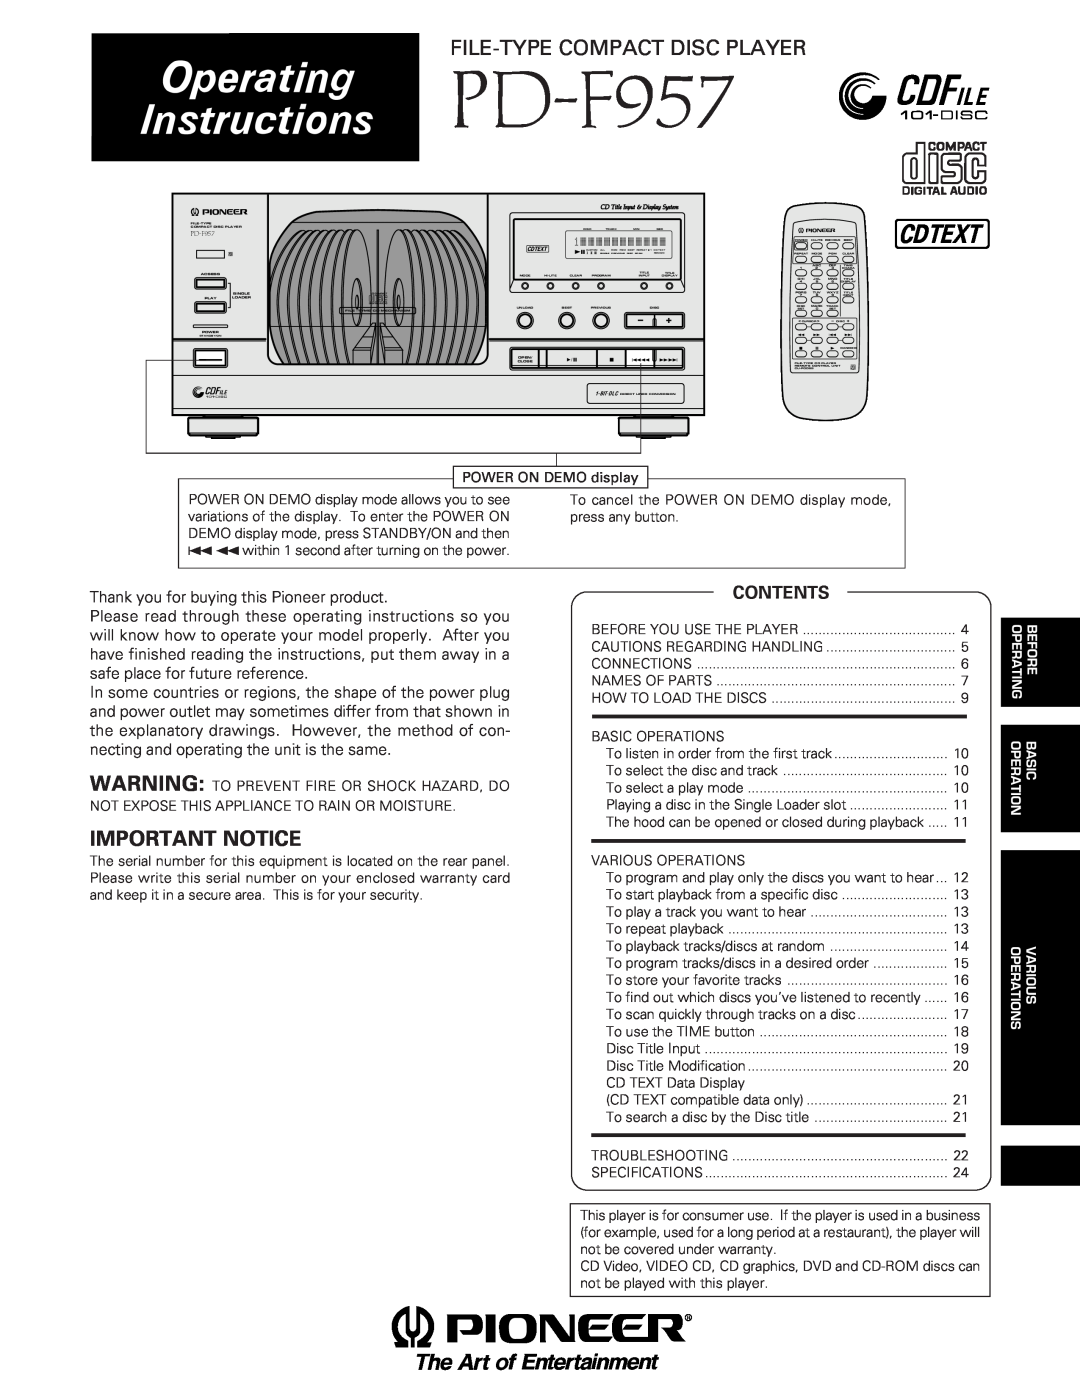 Pioneer PD-F957 specifications File-Typecompact Disc Player, Important Notice, Û¿X/.≥ 